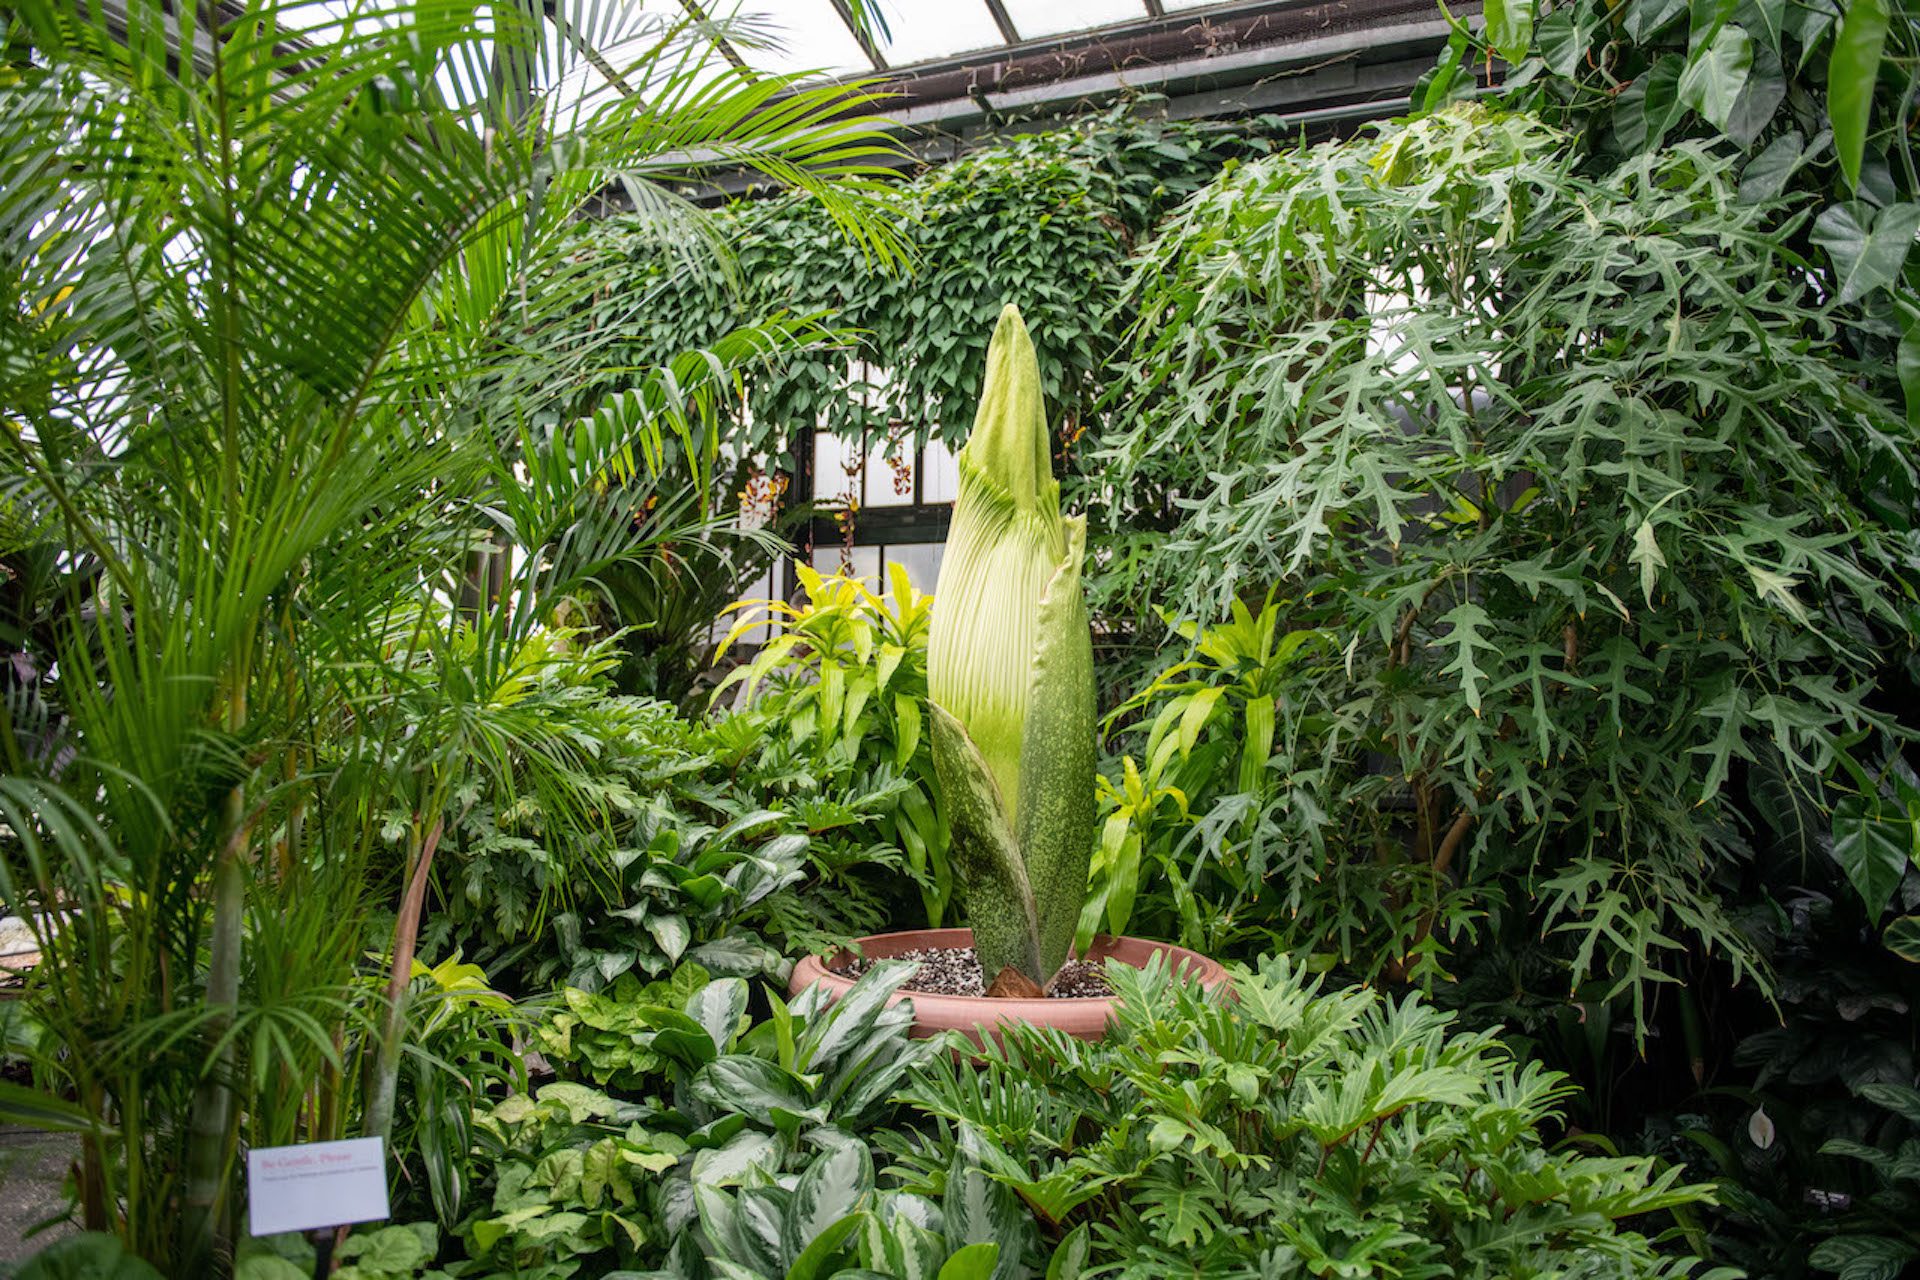 “Well hello there. I’m Sprout,” Longwood Gardens announced on Twitter. “I’m a #TitanArum. And I’m about to make a BIG STINK!”